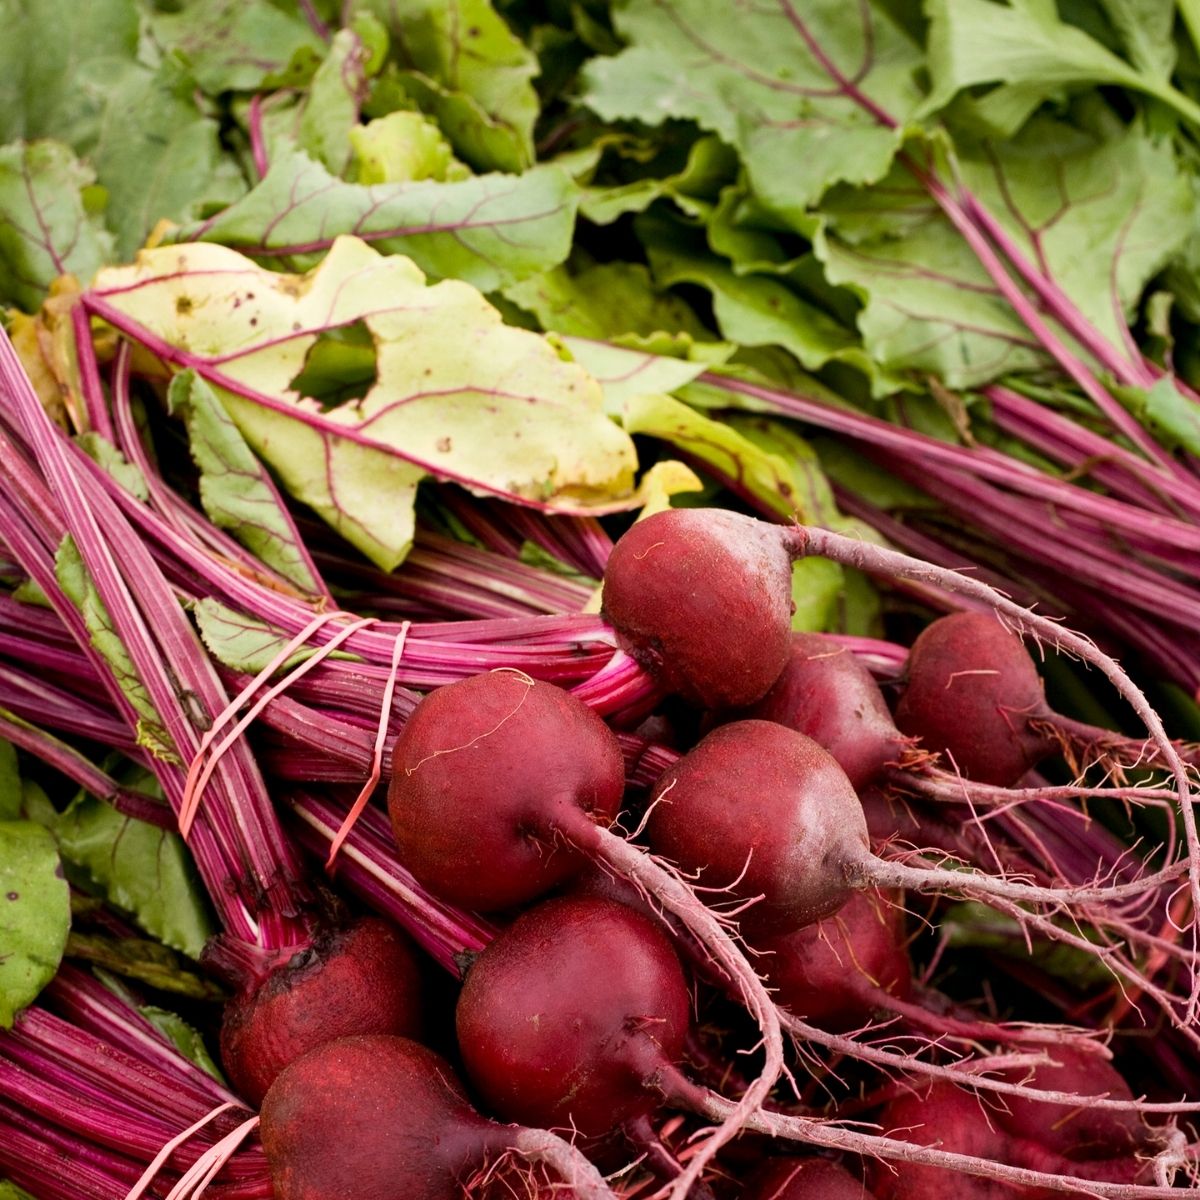 beets with leaves